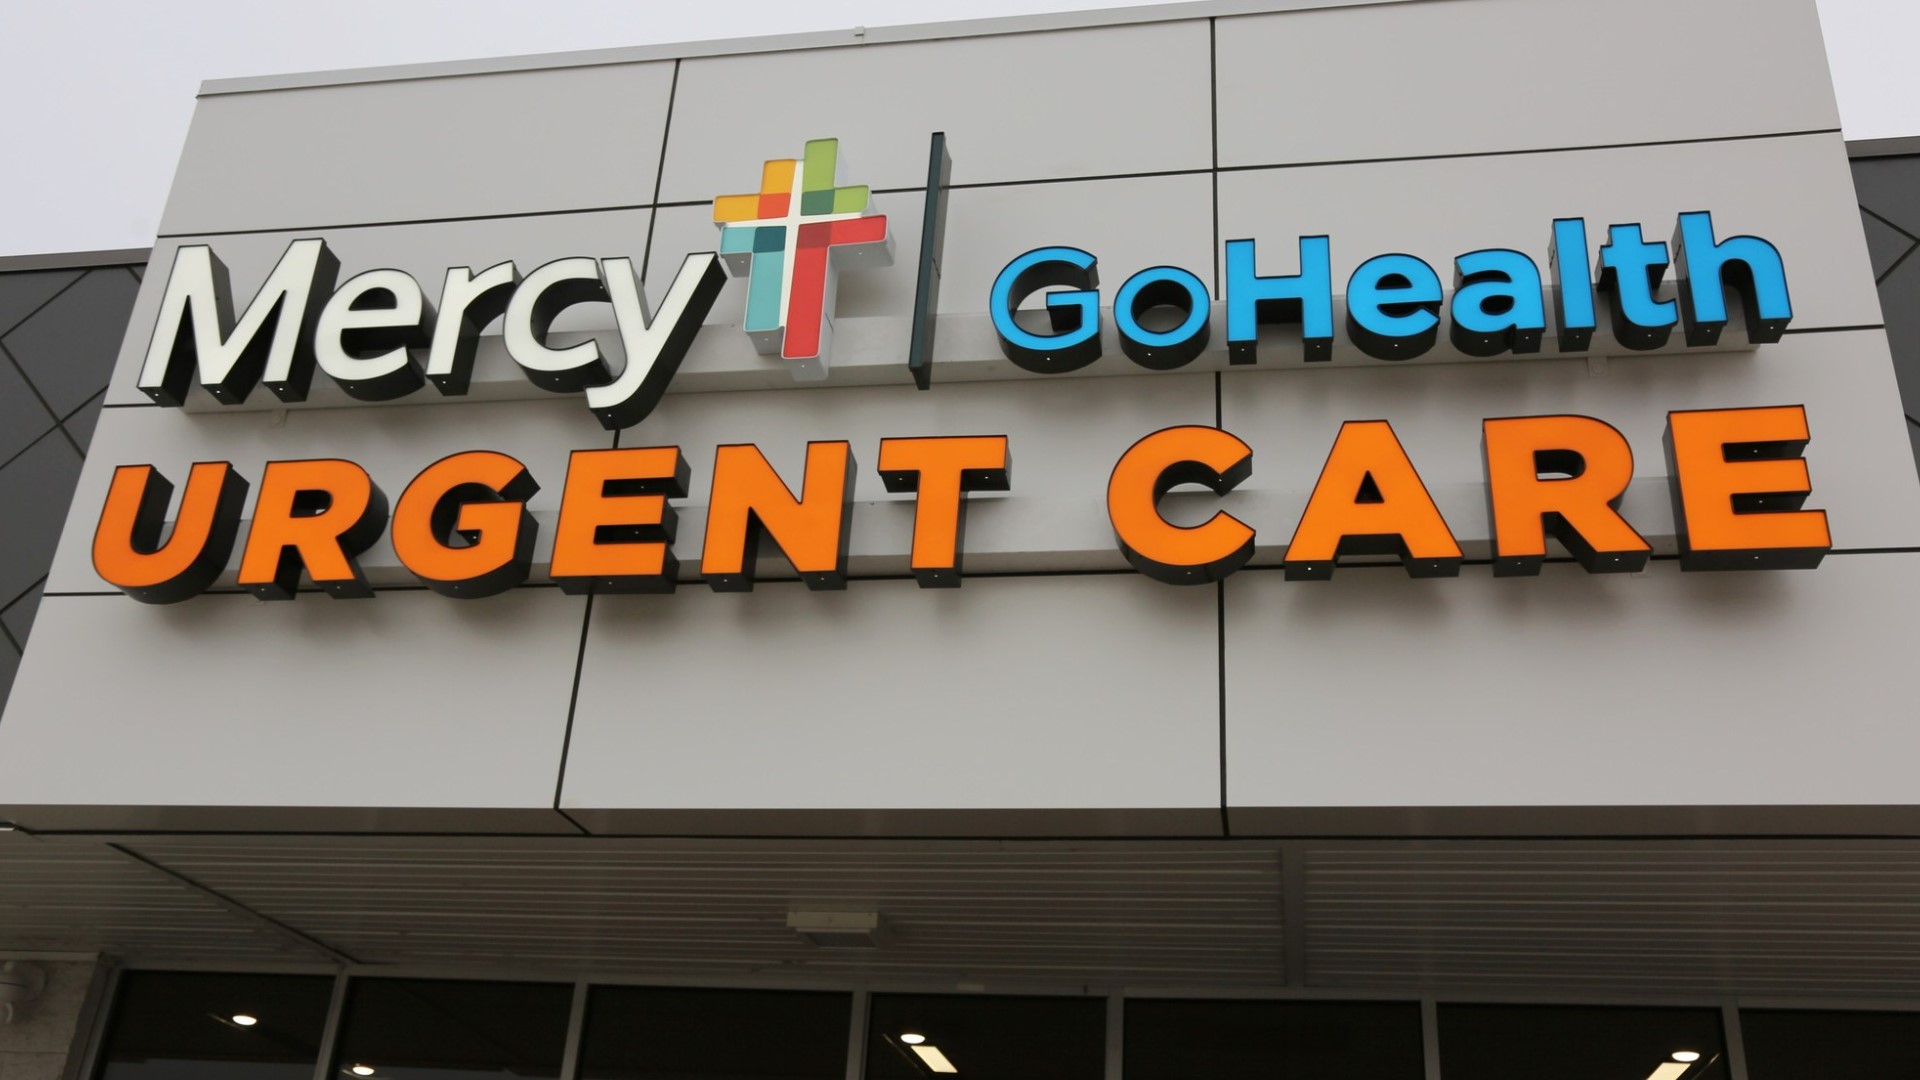 In addition to the new urgent care facility, Mercy announced two urgent care facilities that are set to open in early 2023.